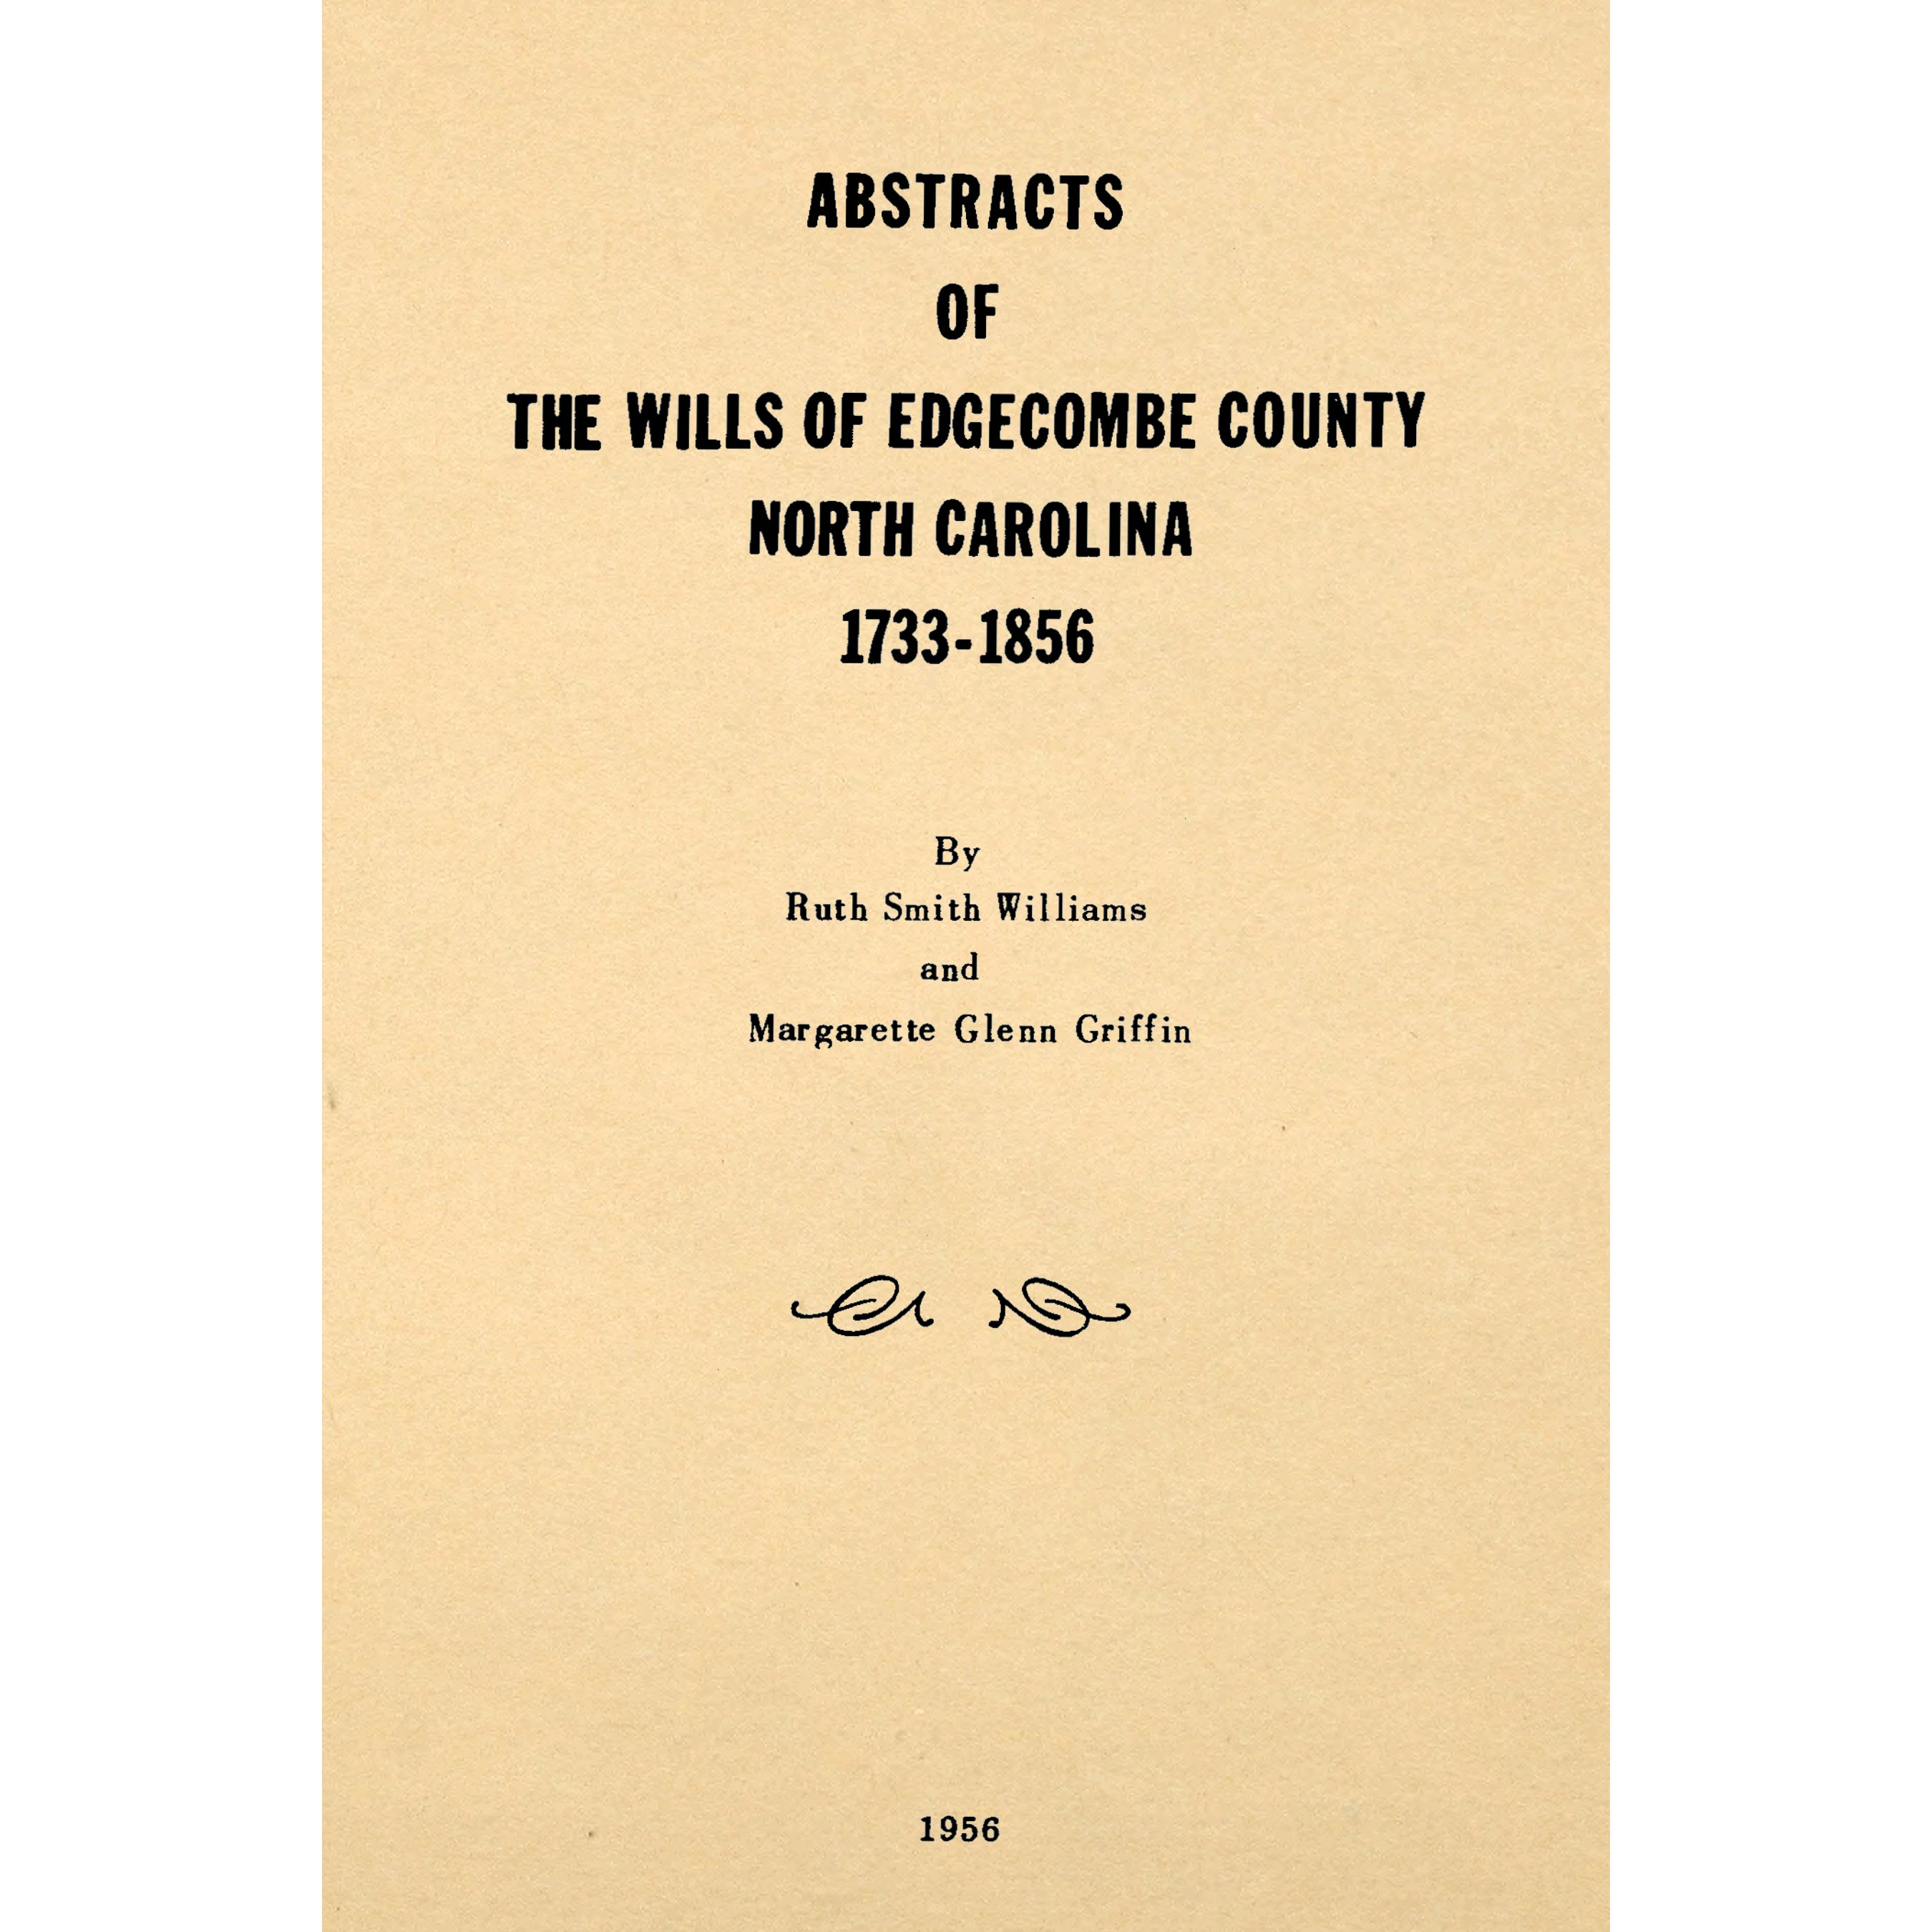 Abstracts of The Wills of Edgecombe County, North Carolina 1733-1856